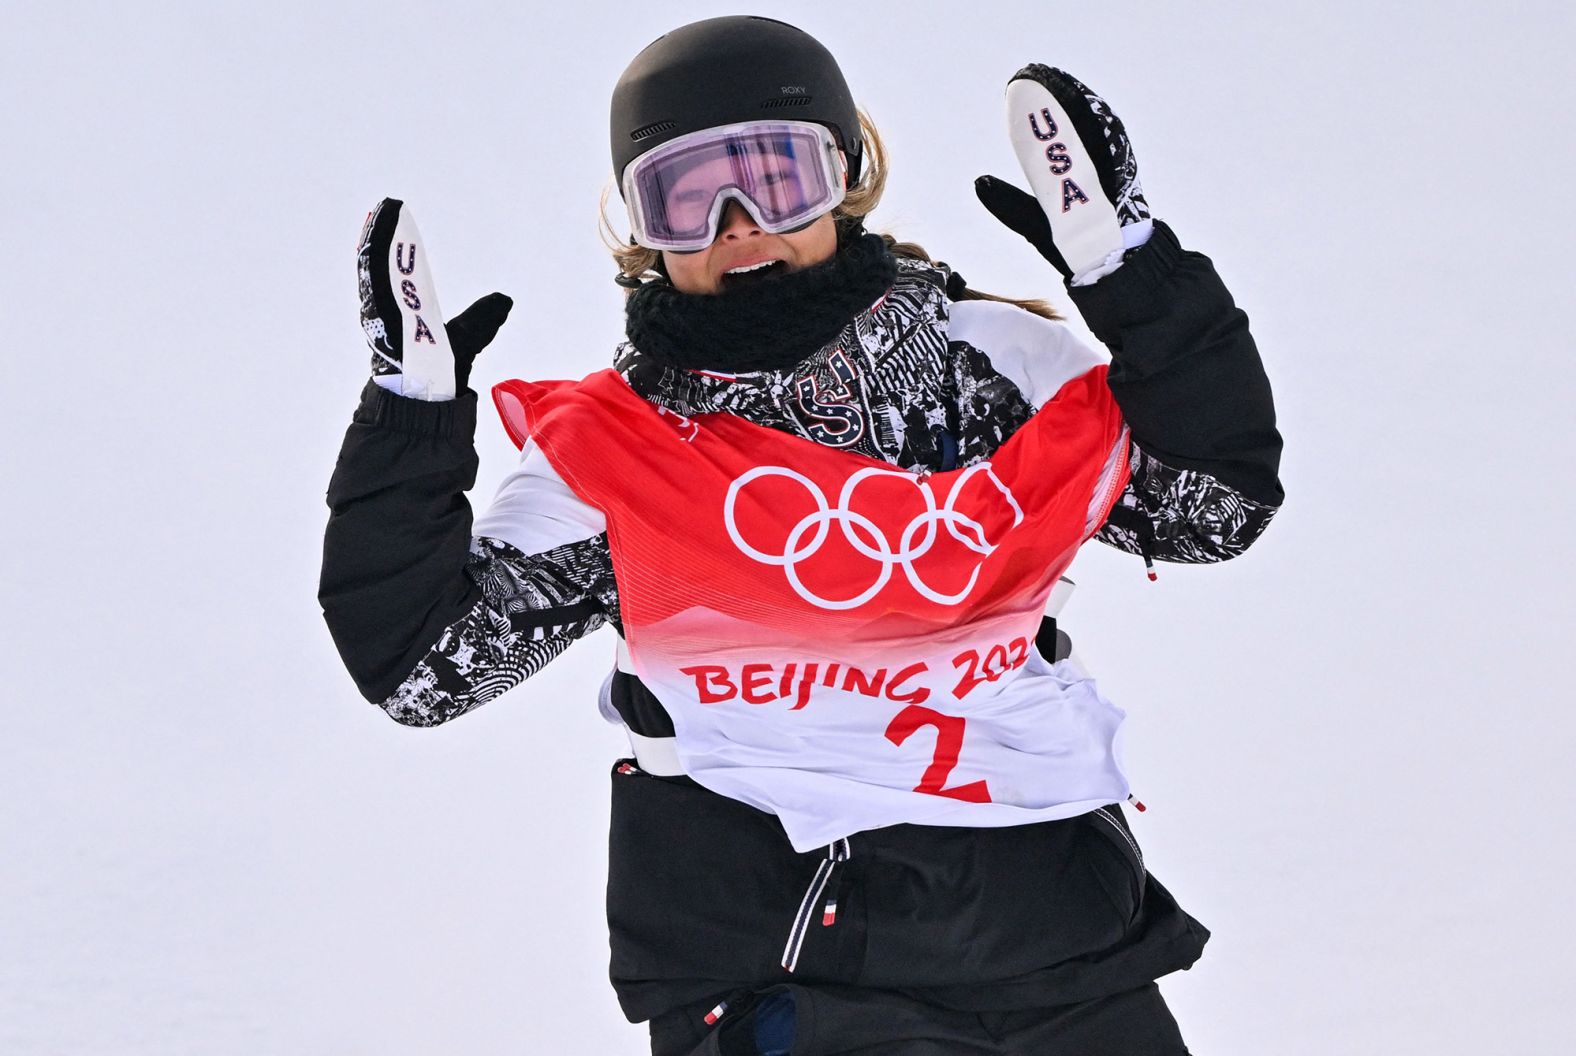 American snowboarding star Chloe Kim reacts after <a href="index.php?page=&url=https%3A%2F%2Fwww.cnn.com%2Fworld%2Flive-news%2Fbeijing-winter-olympics-02-10-22-spt%2Fh_22d233fce7f479733a18aec4faaf56ed" target="_blank">her first of three runs</a> in the halfpipe finals on February 10. She nailed every trick and posted a huge score of 94. It turned out to be the winning run. Kim also won halfpipe gold in 2018.